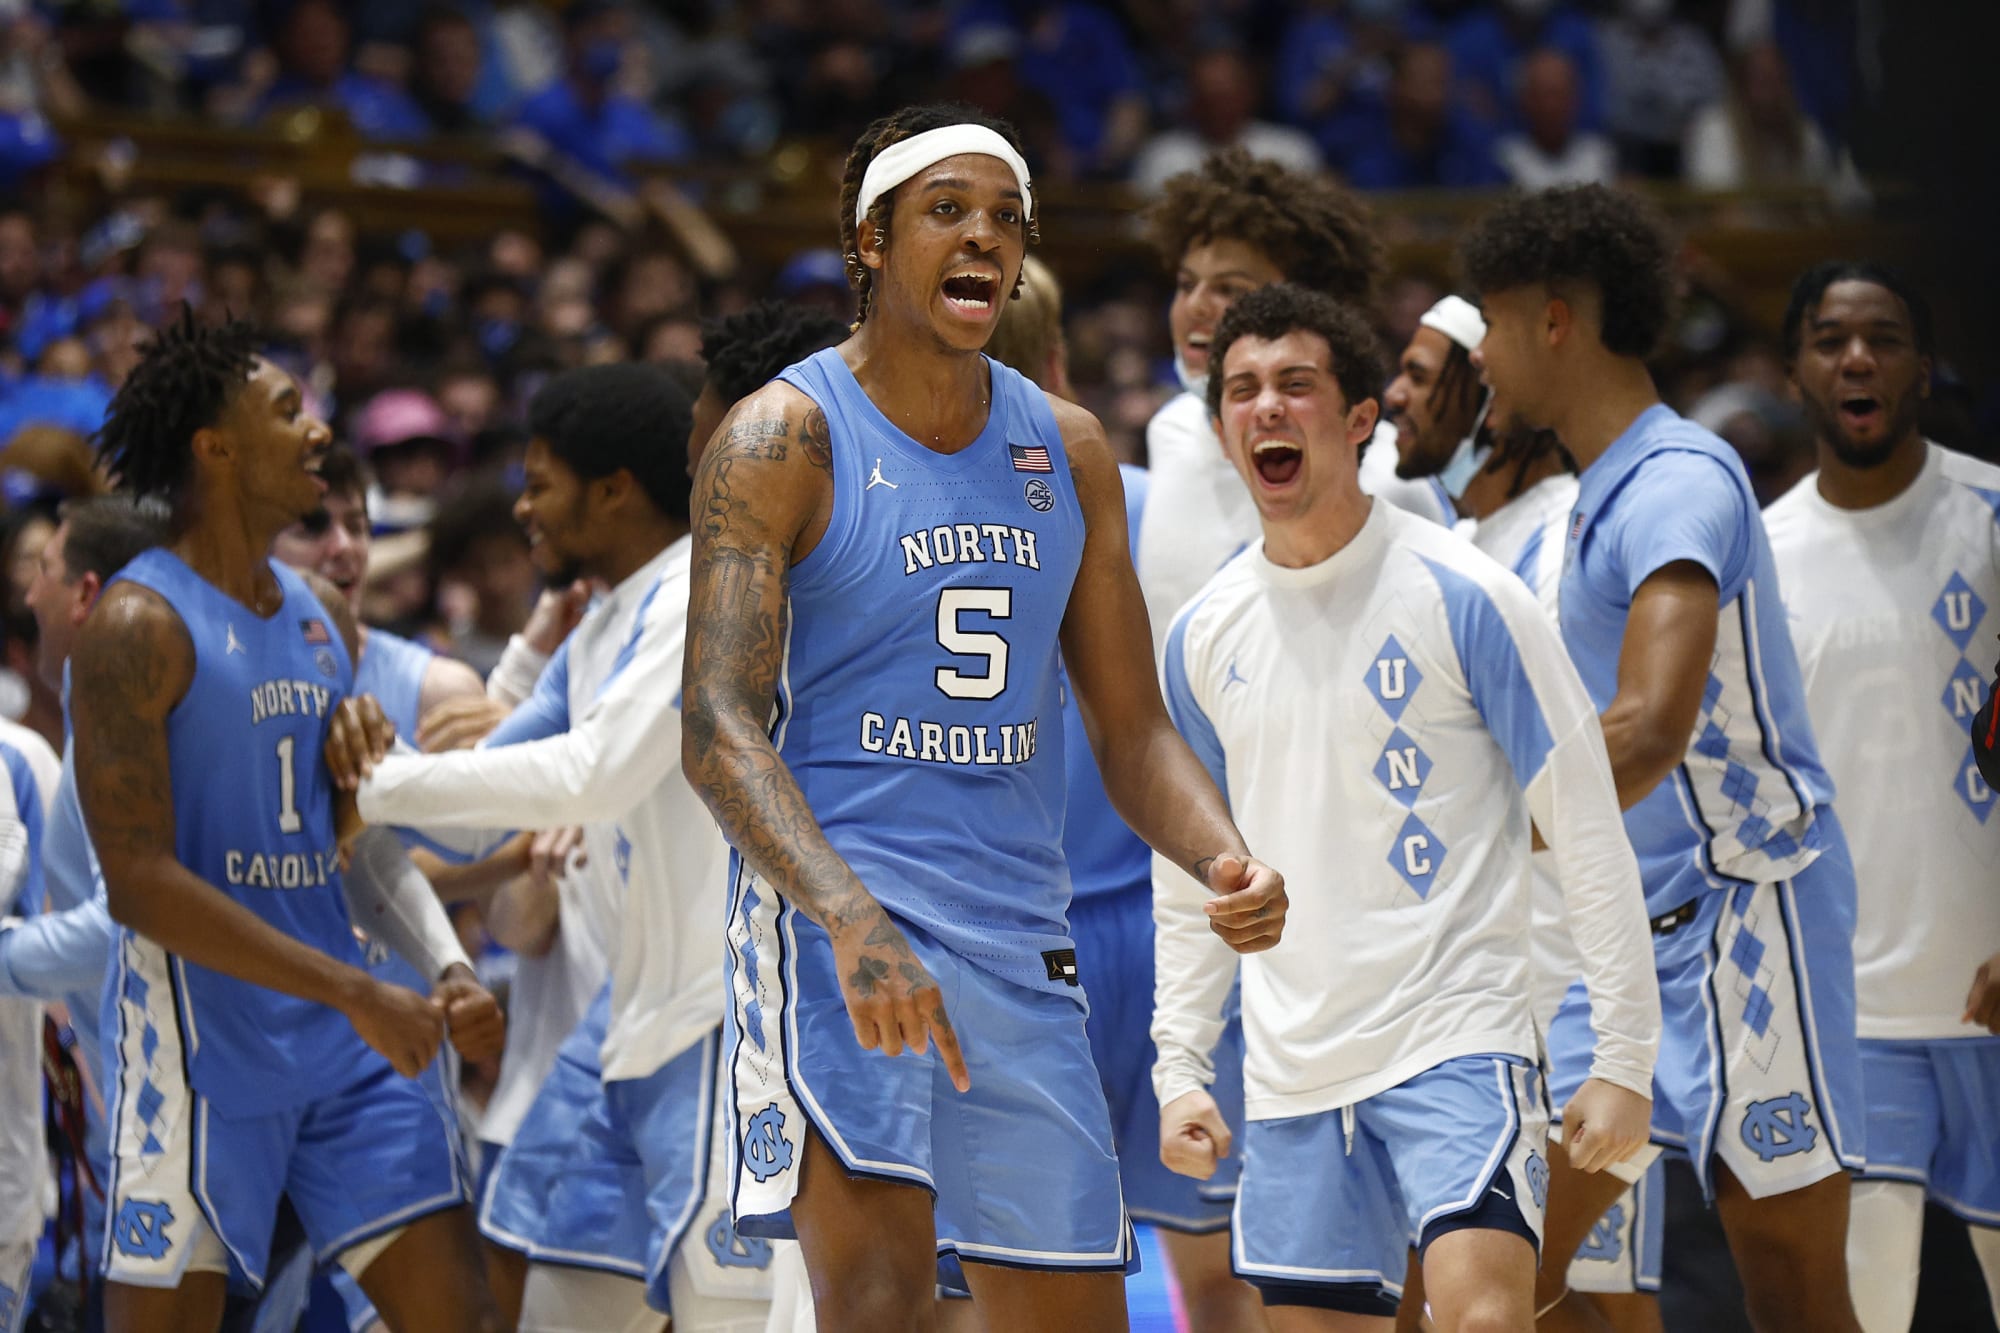 North Carolina is No. 1 in Andy Katz's Power 36 college basketball rankings